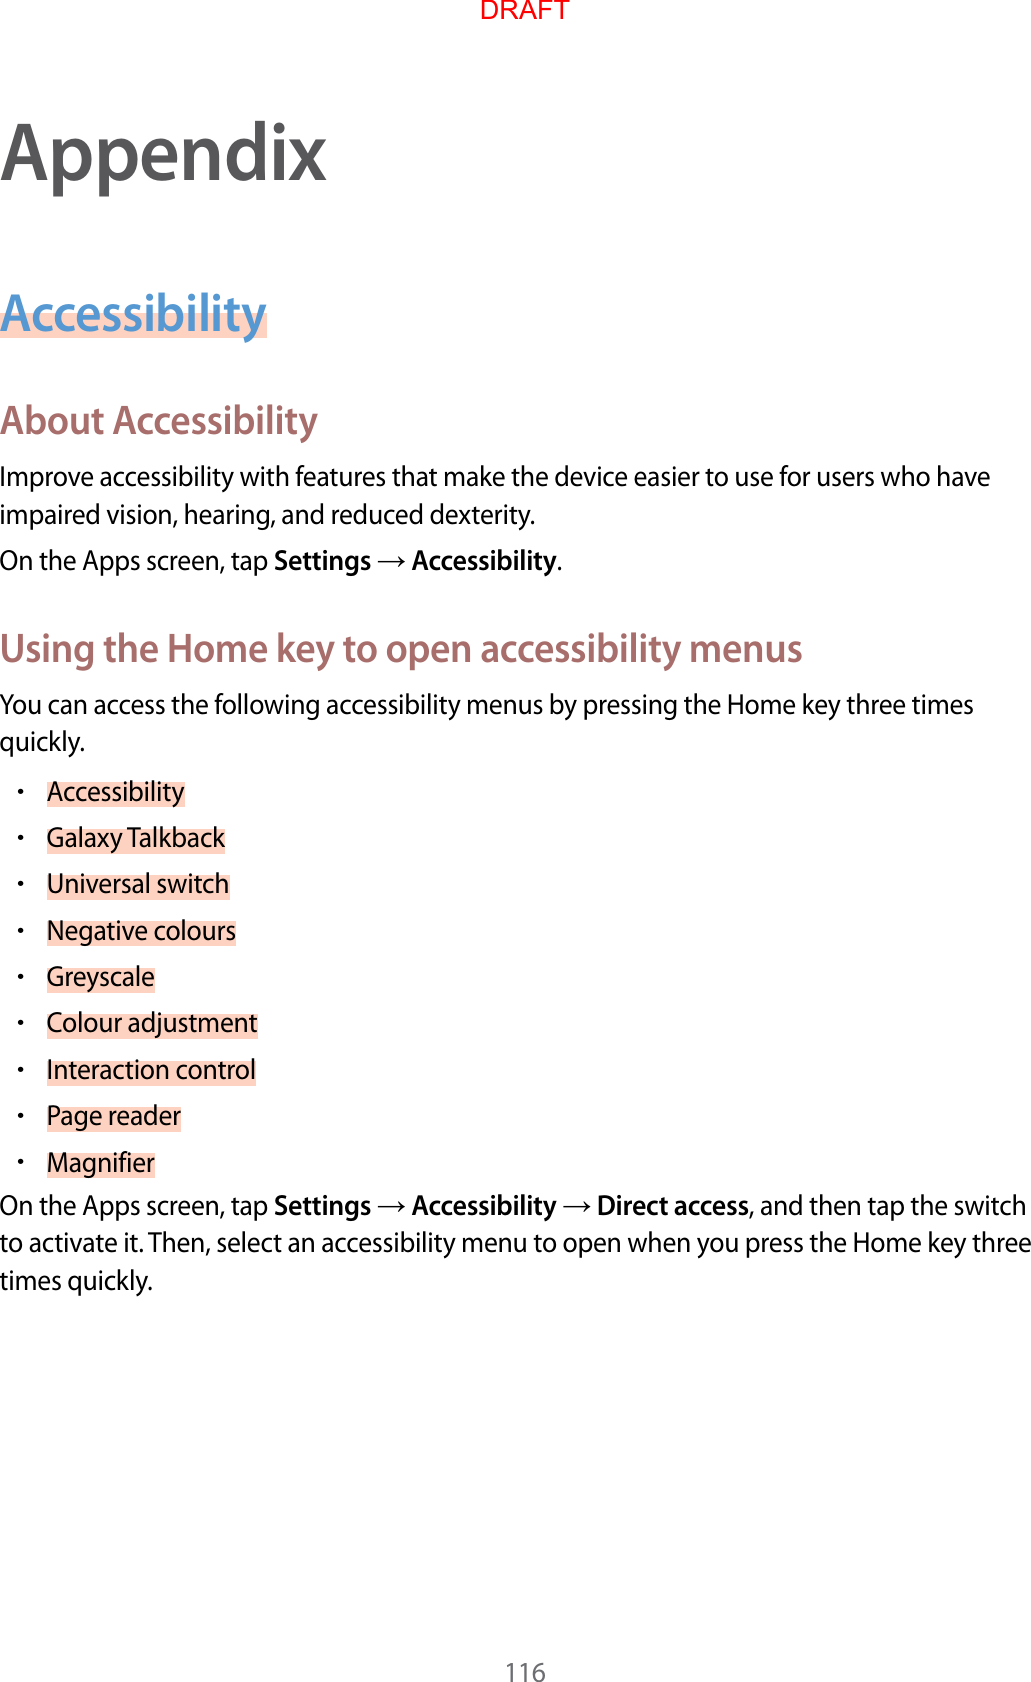 116AppendixAccessibilityAbout A c c essibilityImprove ac c essibility with featur es tha t make the device easier t o use f or users who ha v e impaired vision, hearing , and r educed de xterity.On the Apps screen, tap Settings  Accessibility.Using the Home k ey t o open ac c essibility menusYou can access the follo wing acc essibility menus by pr essing the Home key thr ee times quickly.•Accessibility•Galaxy T alkback•Universal switch•Negative c olours•Greyscale•Colour adjustment•Interaction control•P age r eader•MagnifierOn the Apps screen, tap Settings  Accessibility  Direct access, and then tap the switch to activate it. T hen, select an accessibility menu to open when you pr ess the Home key thr ee times quickly .DRAFT